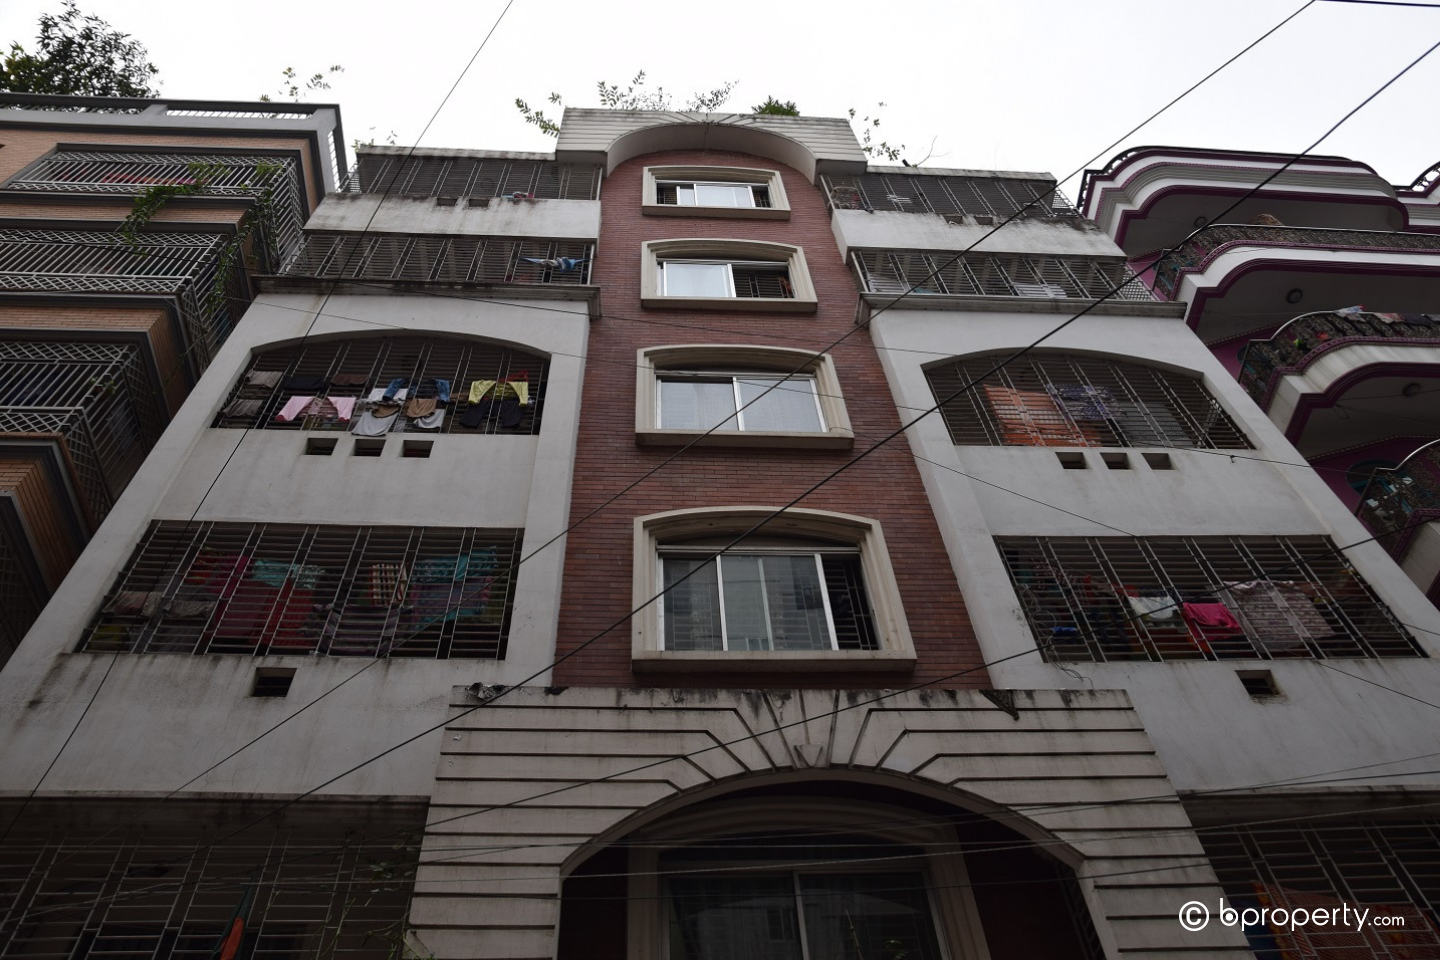 If you want to buy an apartment in Dhaka, this property might turn out to be great option